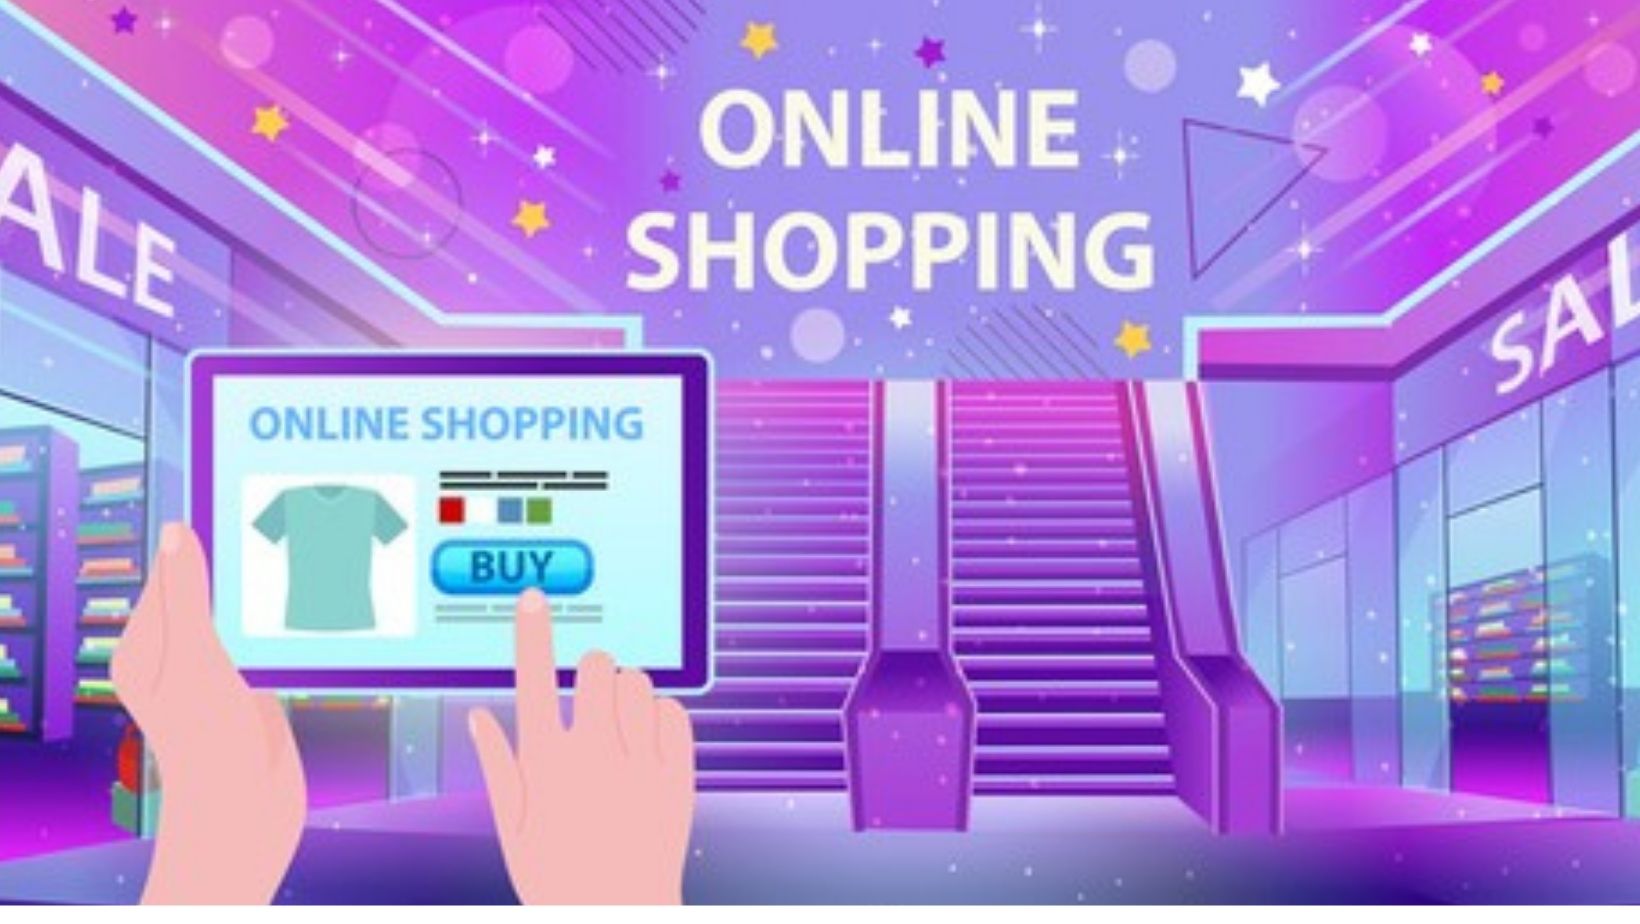 Online shopping in Pakistan: 10 things to avoid